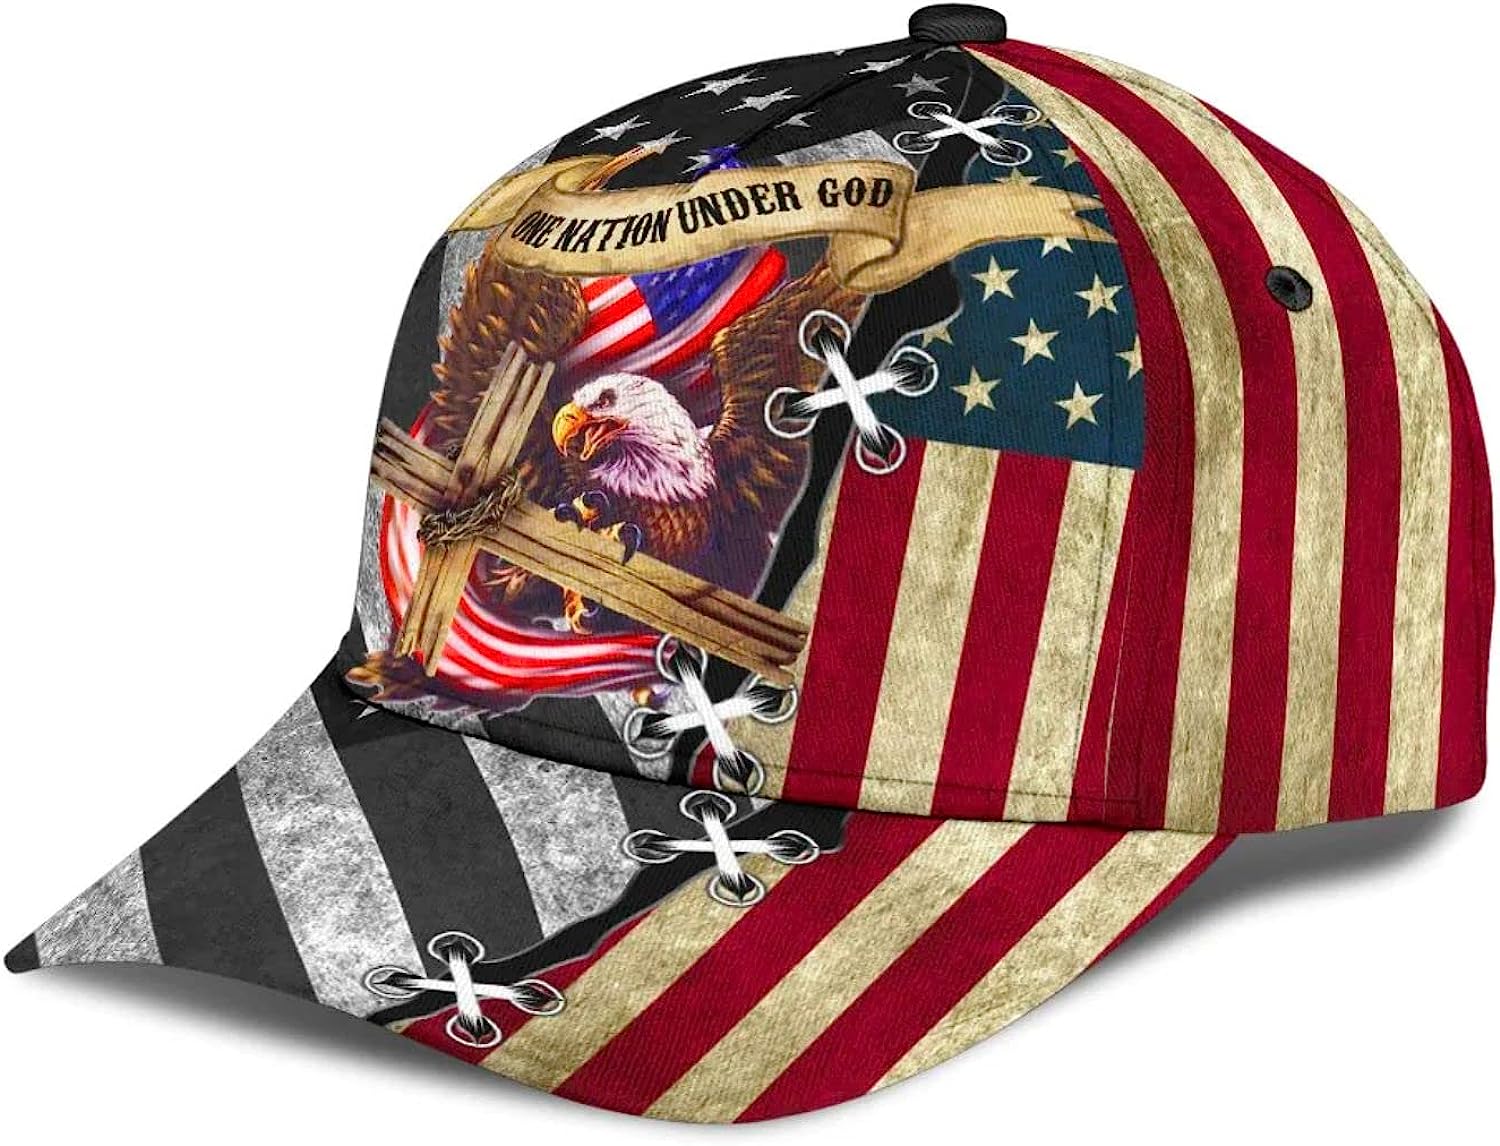 One Nation Under God Cross Eagle Classic Hat All Over Print - Christian Hats for Men and Women